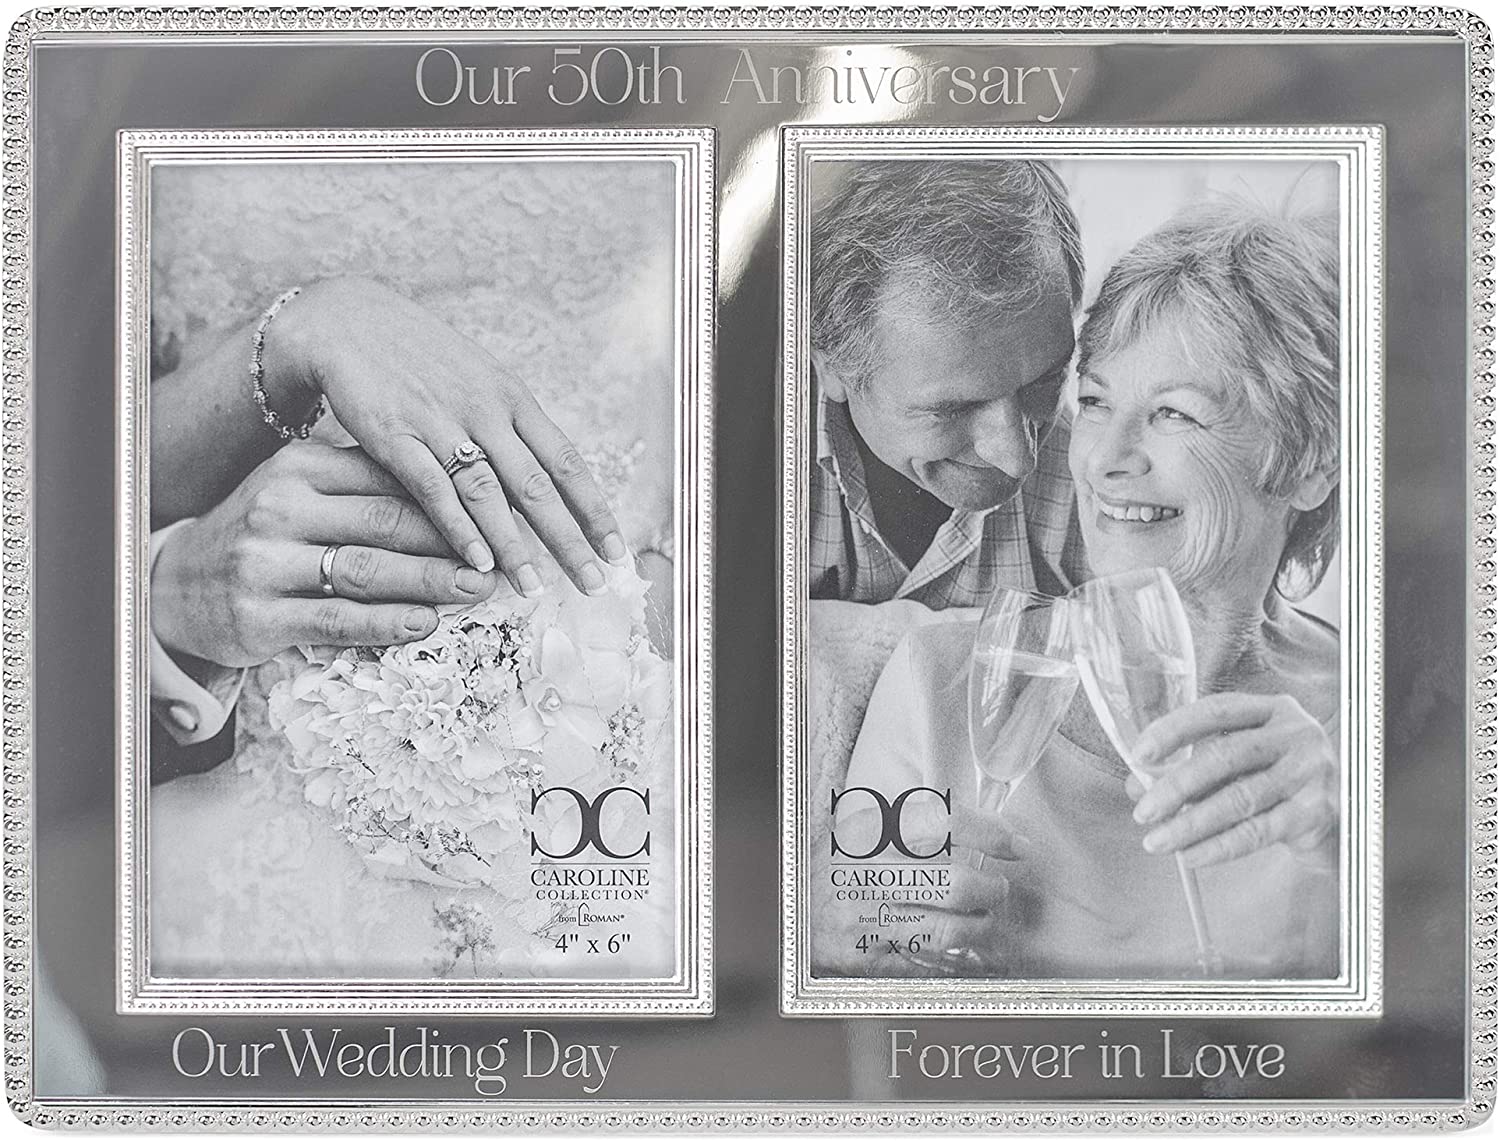 Roman 7-inch High 50th Anniversary Double Picture Frame